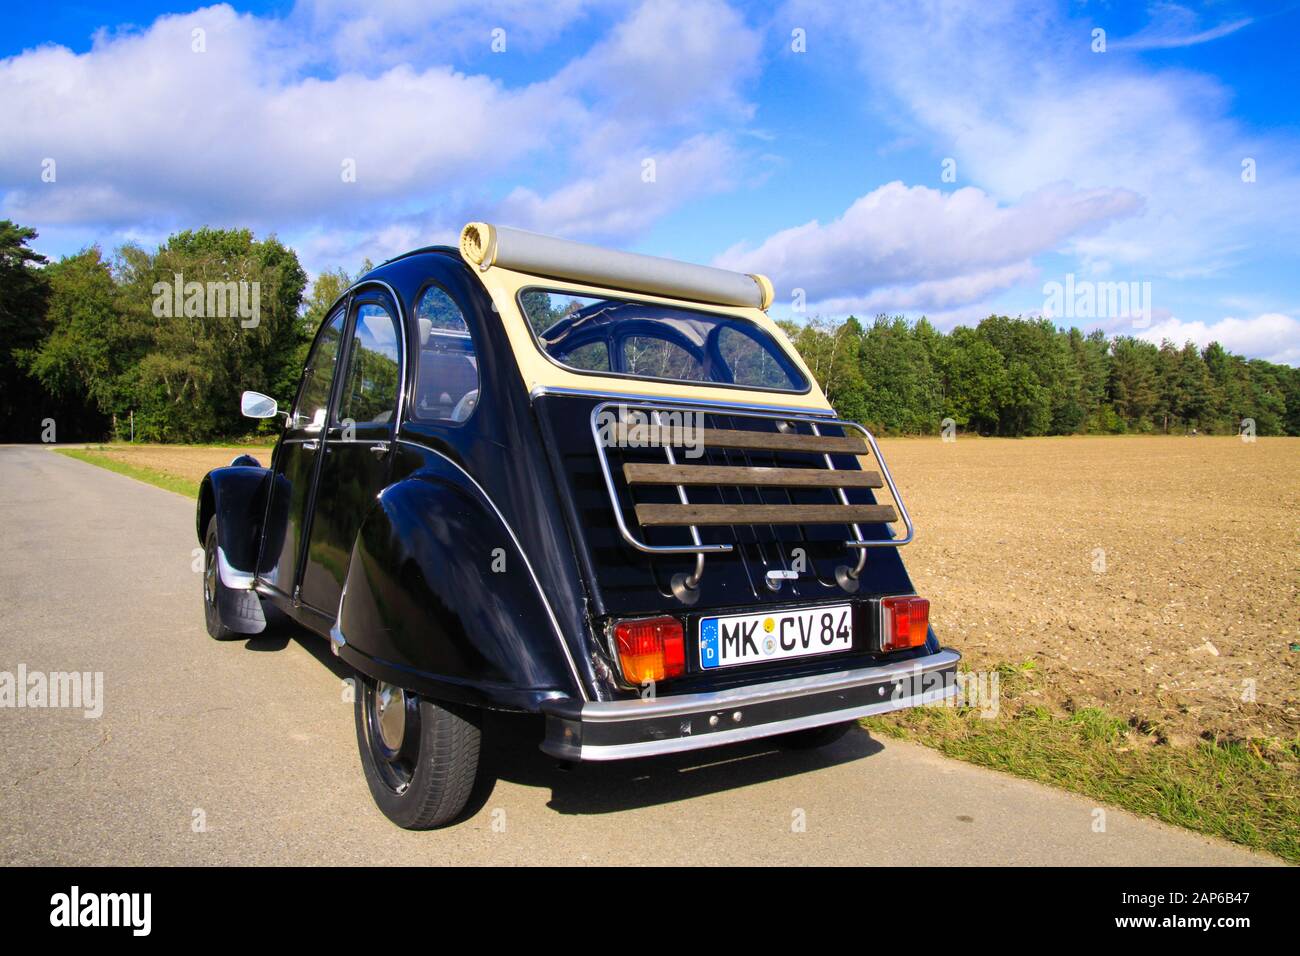 Viersen, Germany - October 12. 2019: Rear view of black French classic cult car 2CV with open roof and wooden luggage rack in rural area against blue Stock Photo